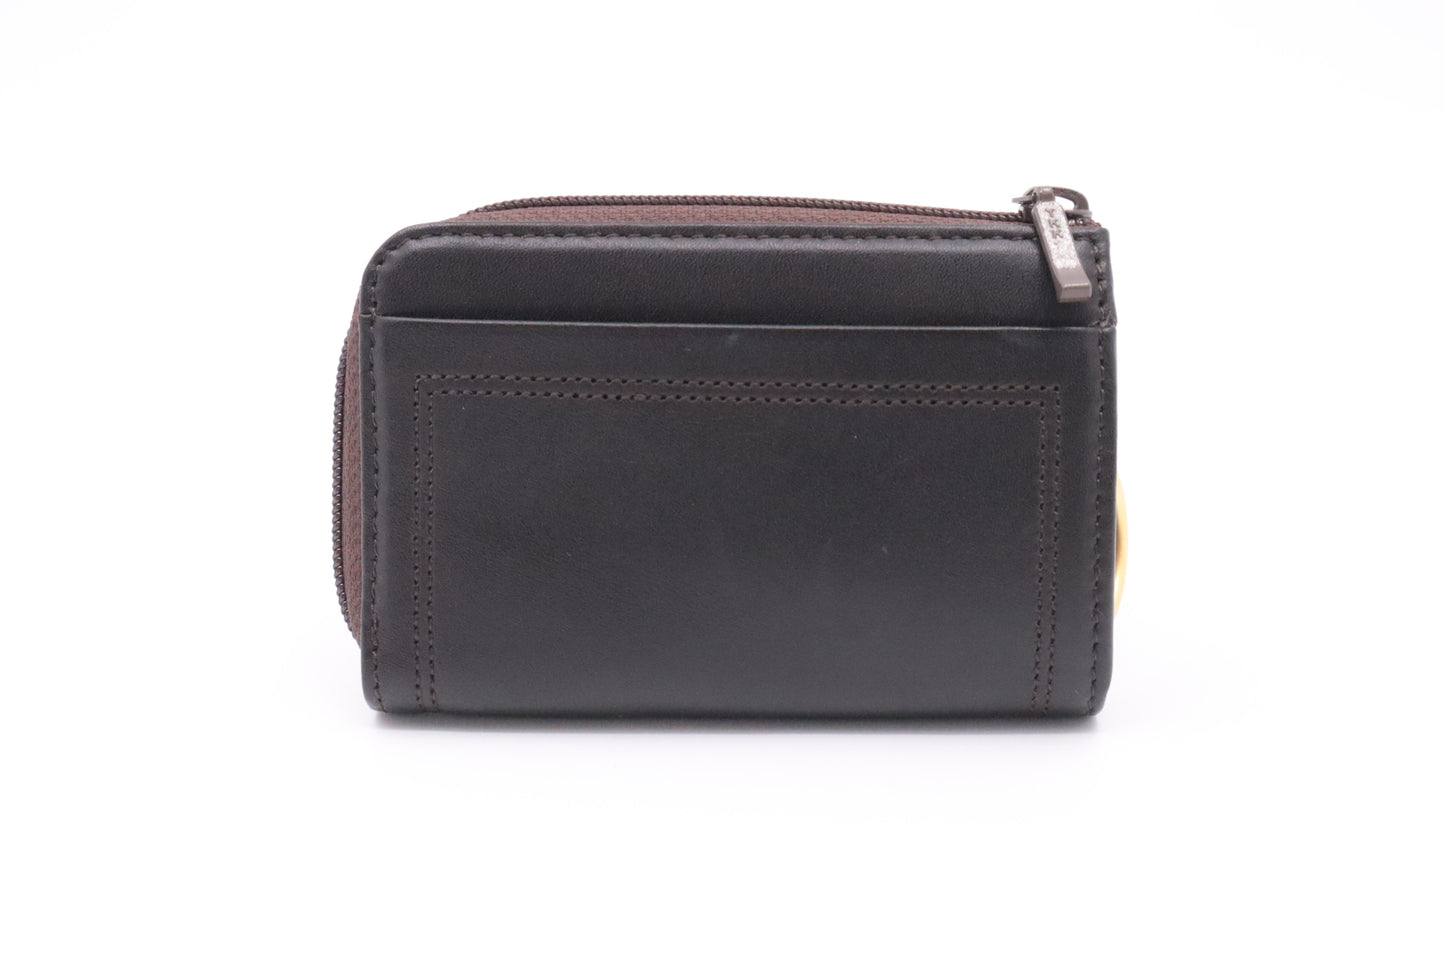 YSL Saint Laurent Coin Case in Brown Leather